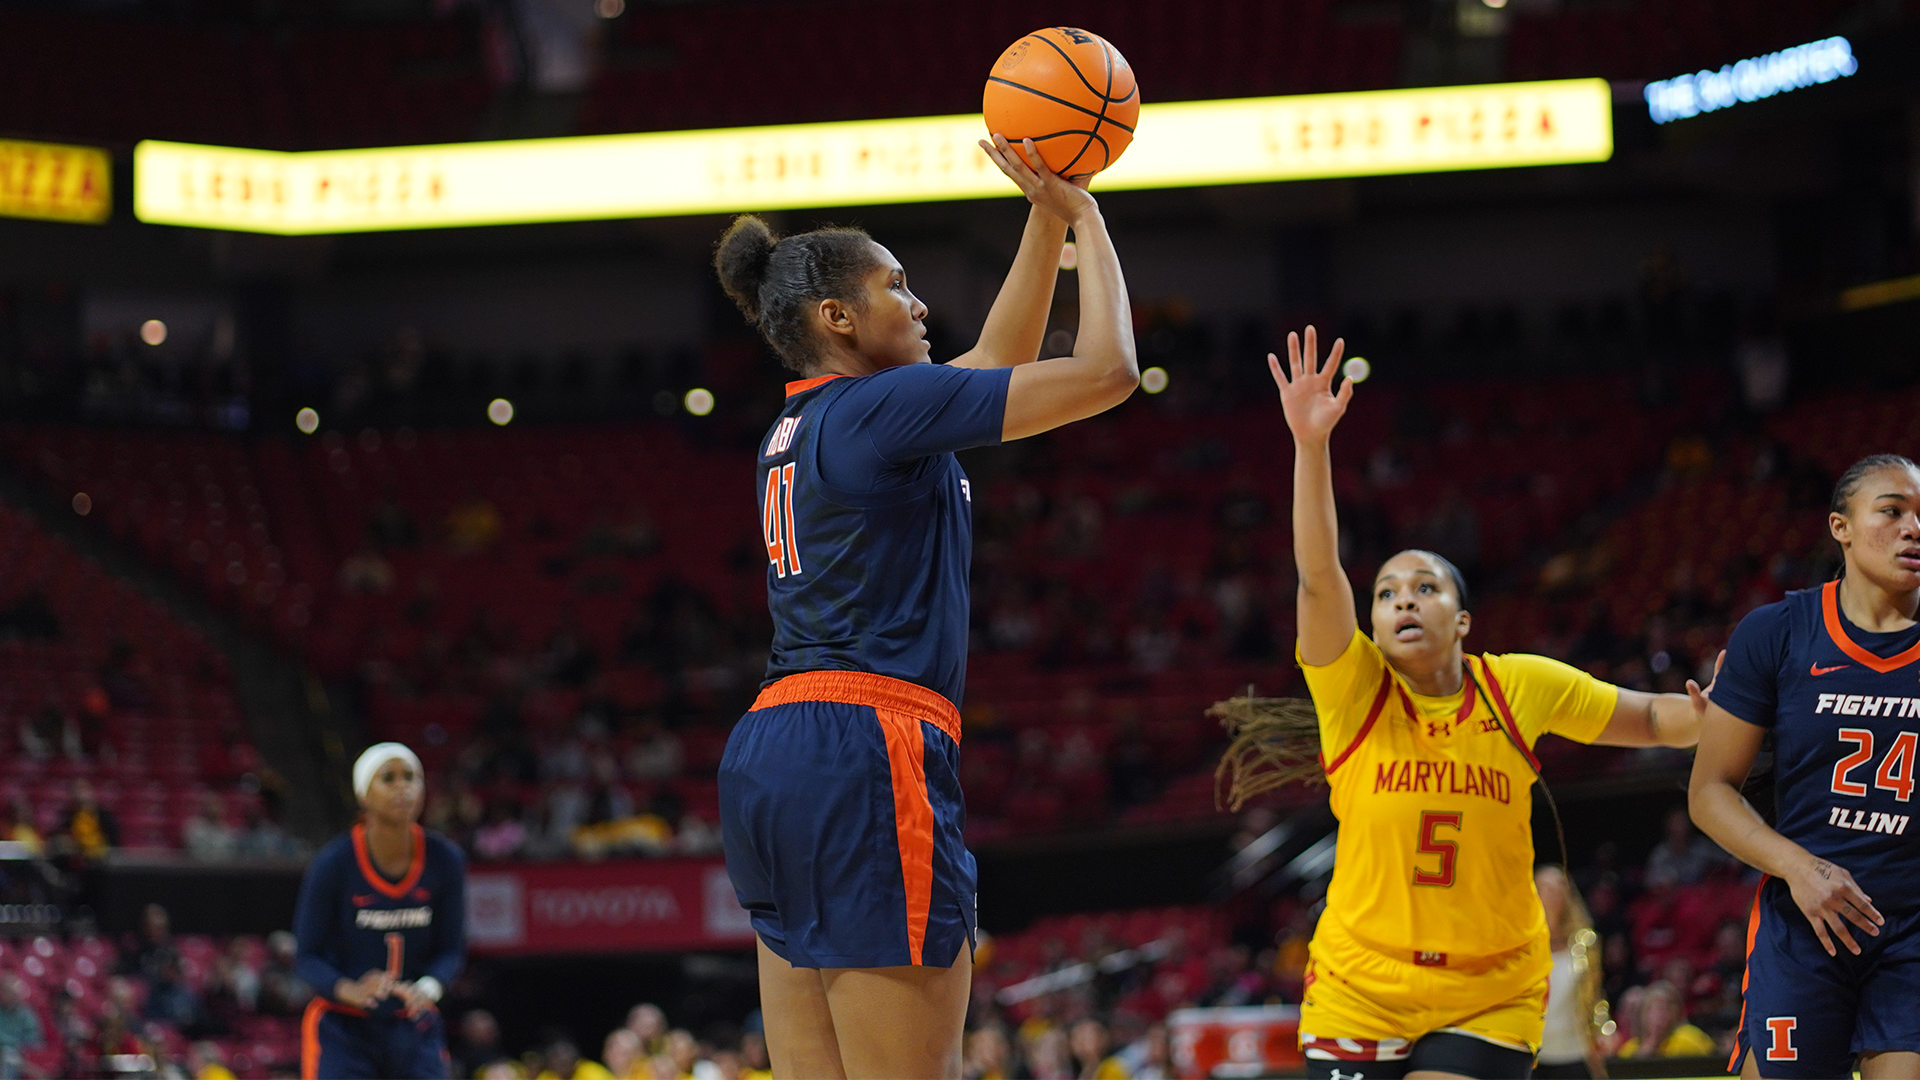 Illini Women Come Up Short In Bid For 1st Win At Maryland